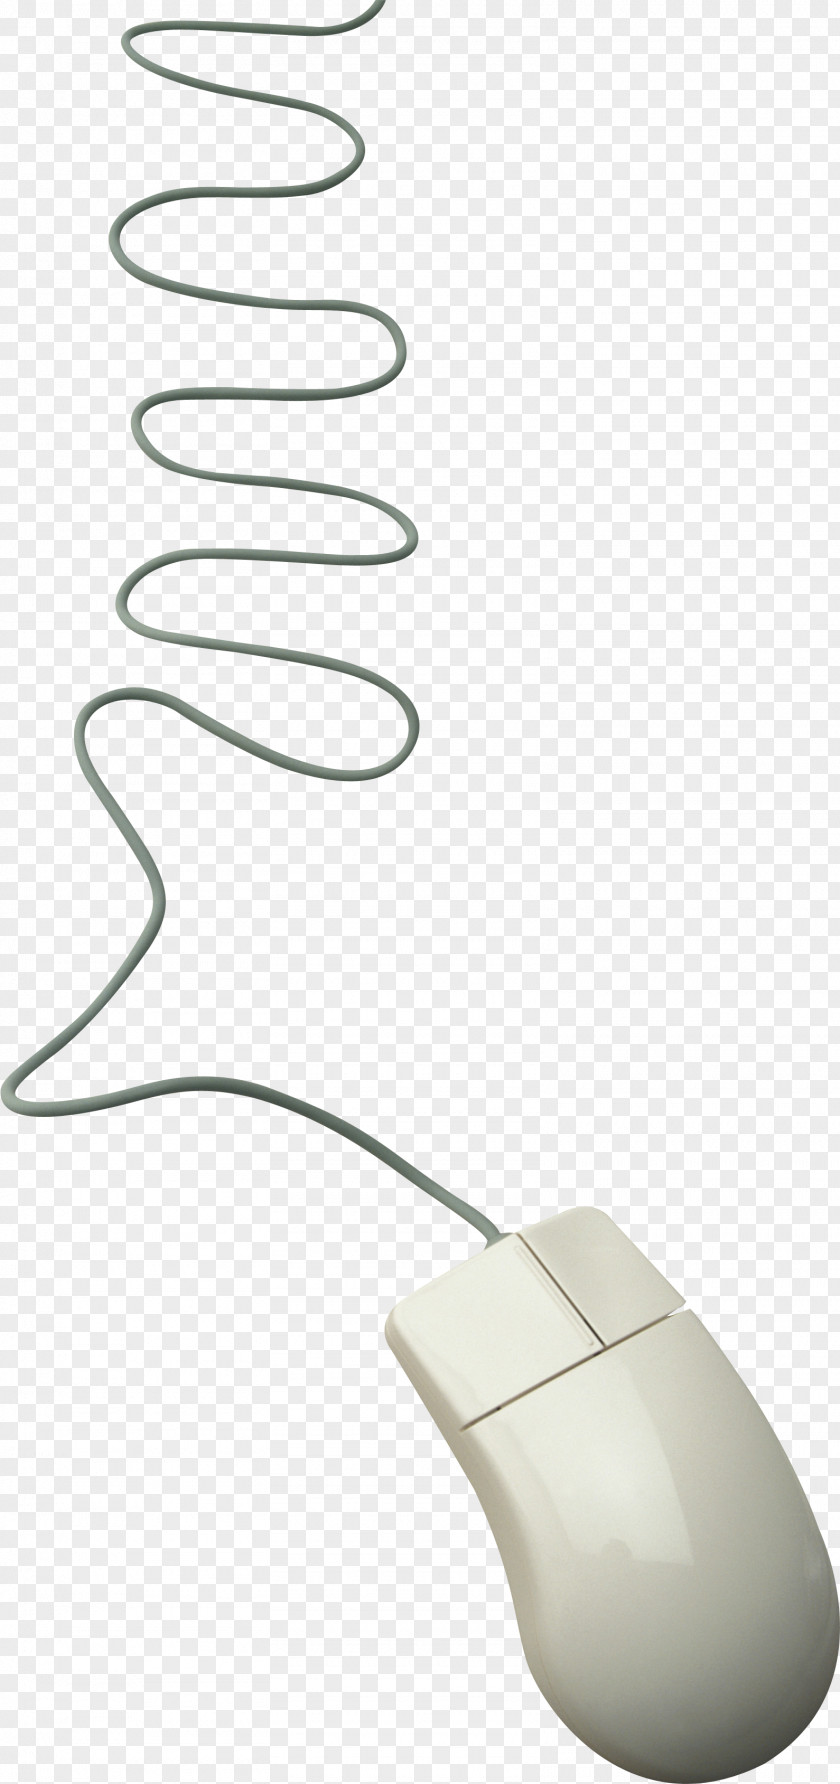 White Computer Mouse Image Optical Pointer Pointing Device PNG